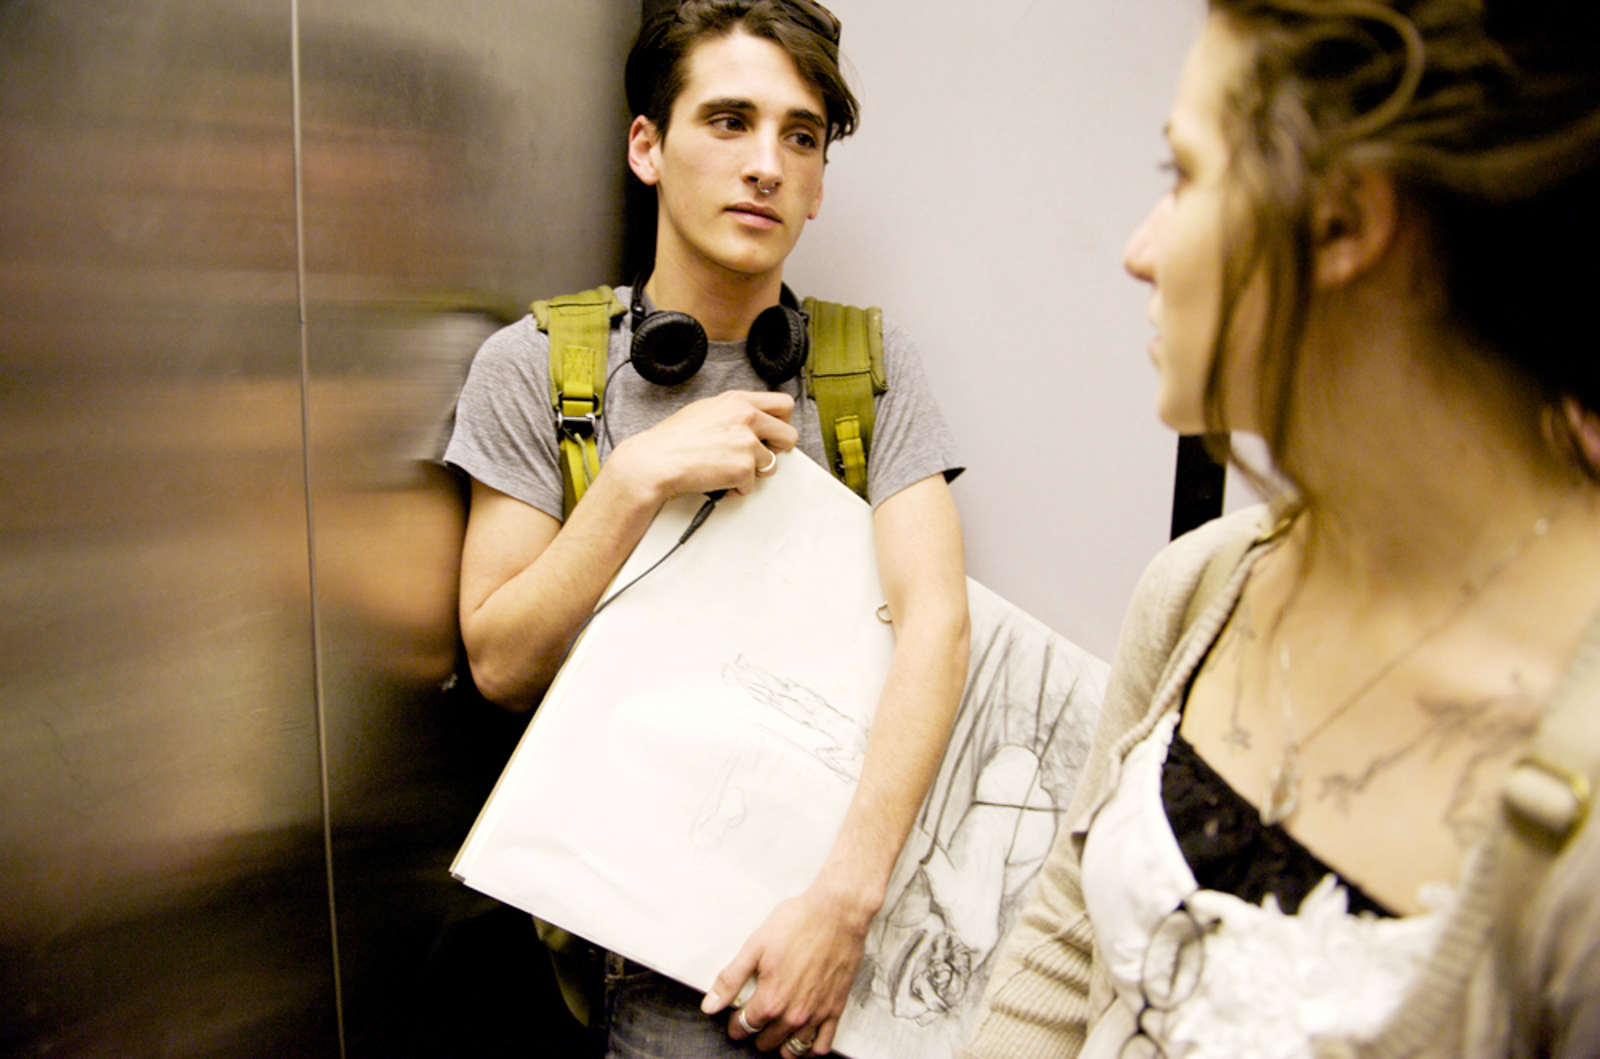 Male student in an elevator wearing headphones with female student looking back